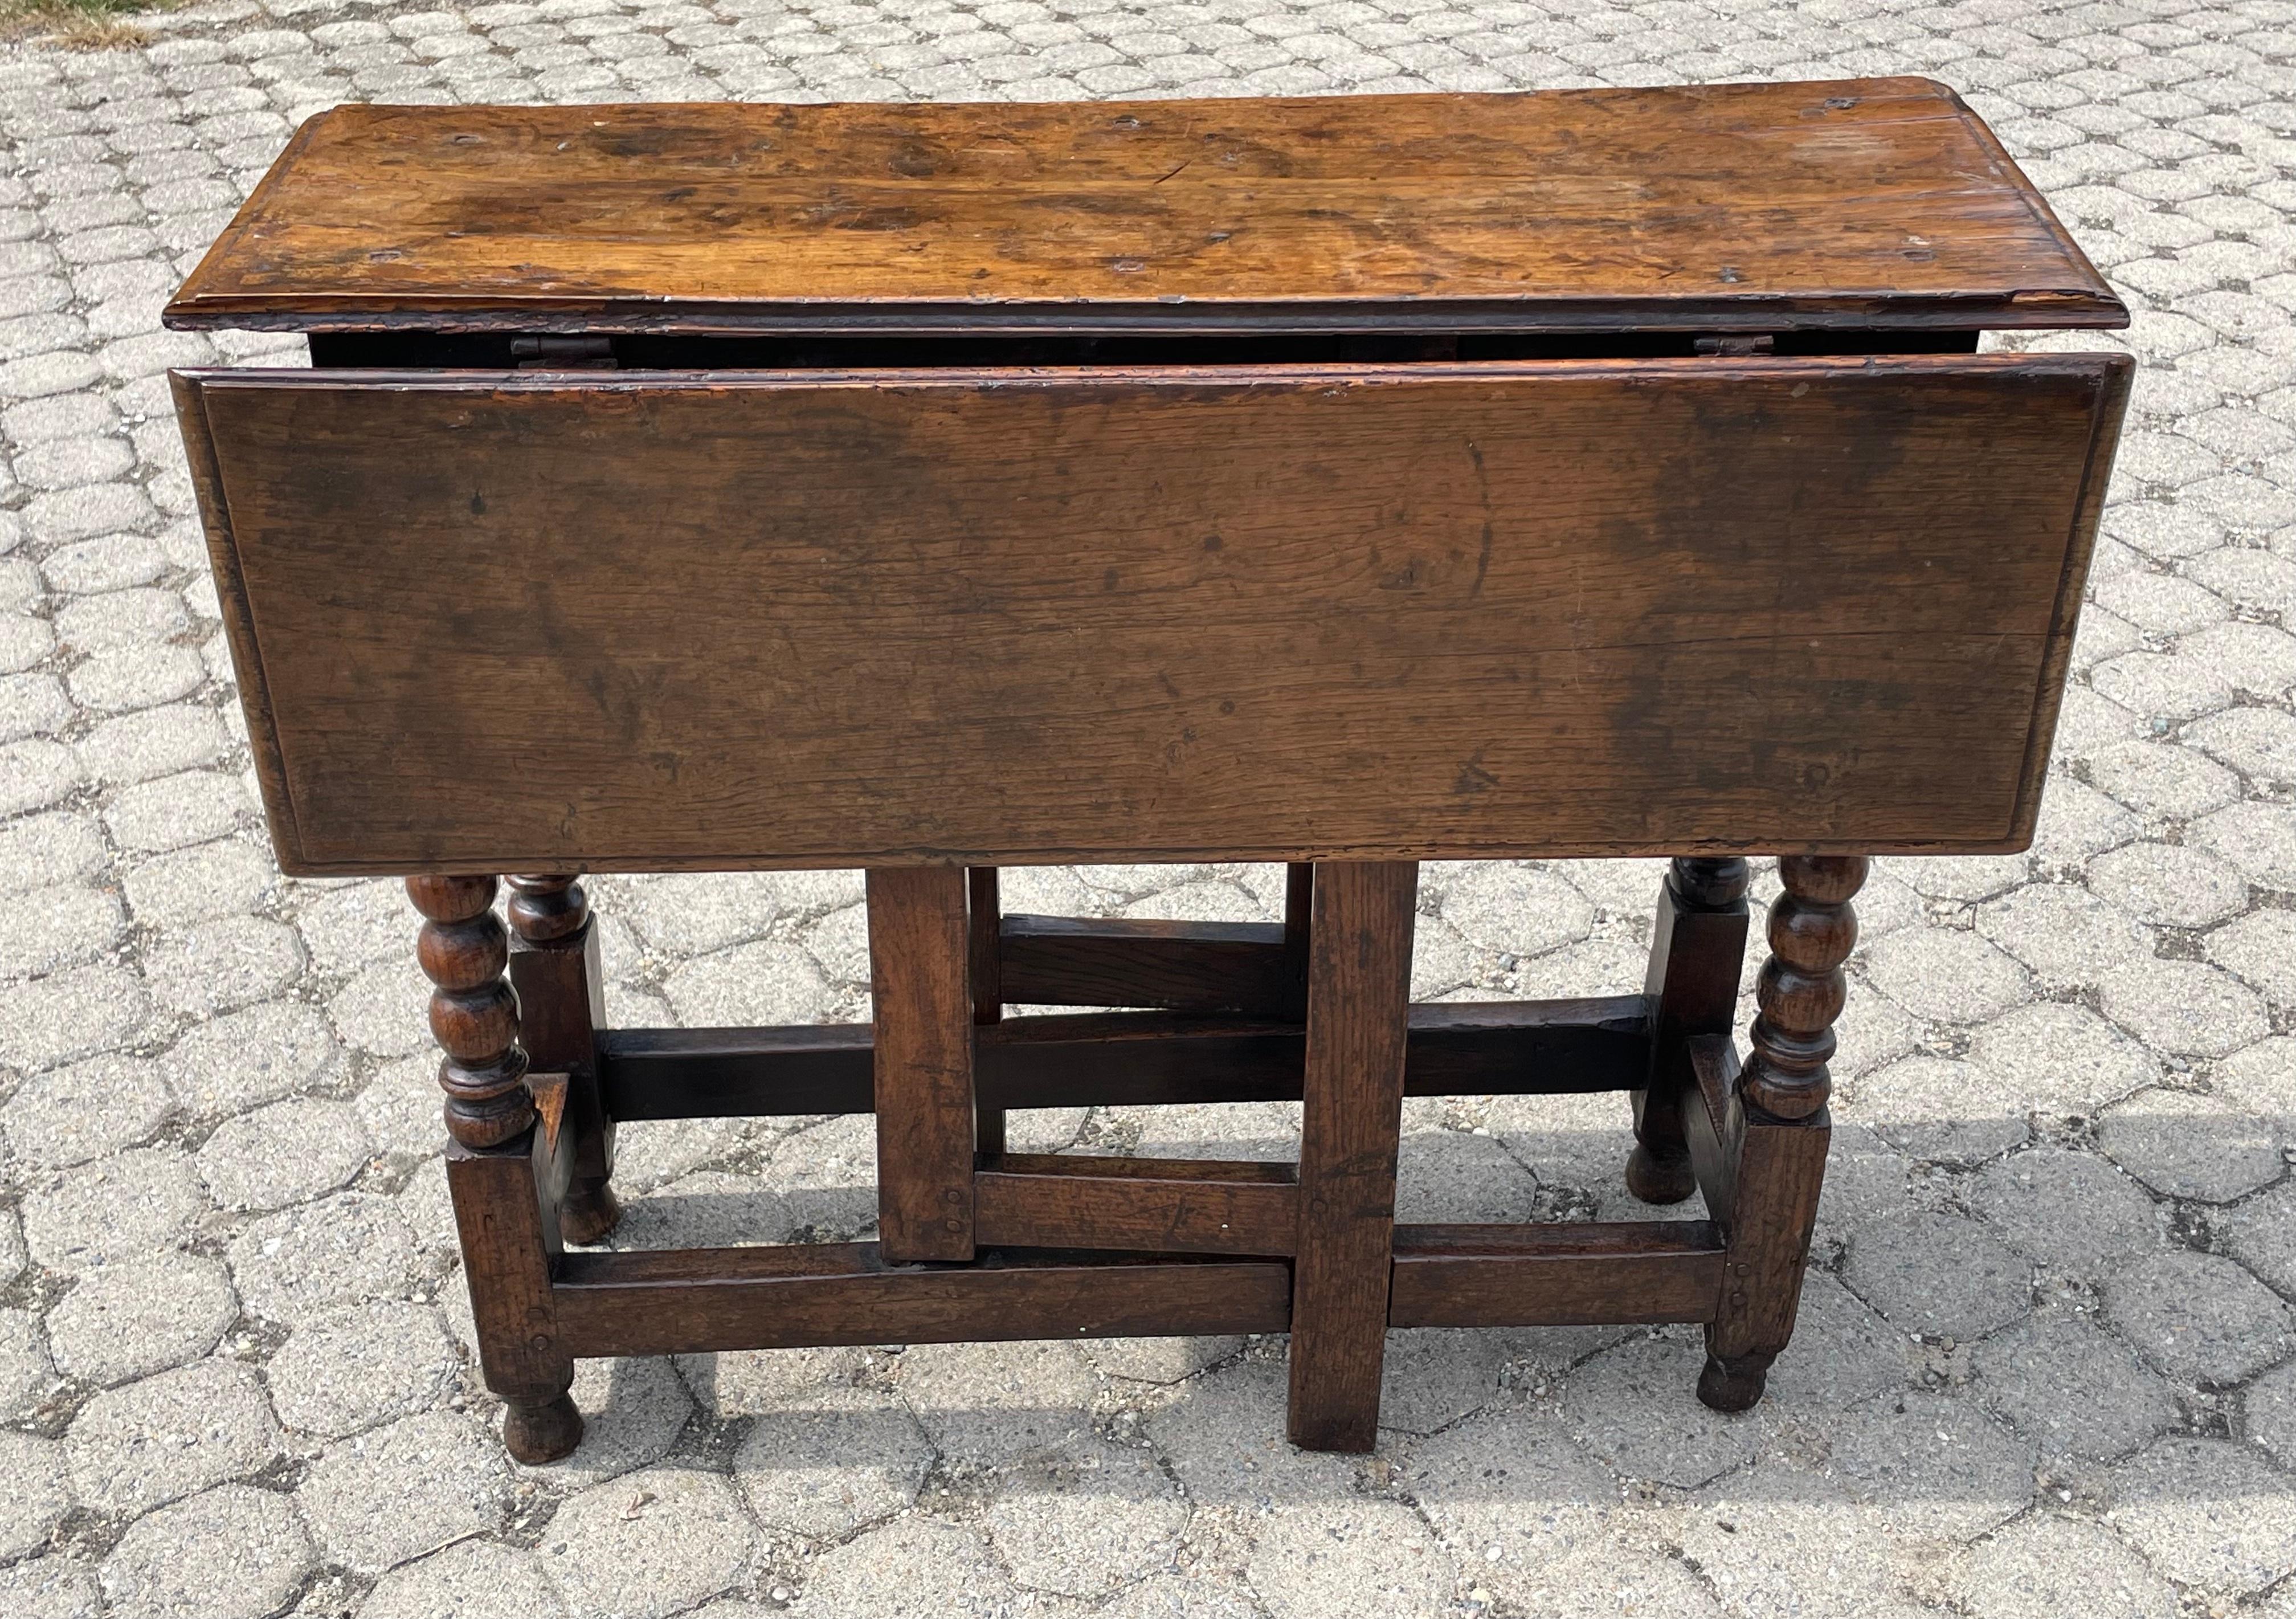 Early 18th century oak gateleg table of diminutive size.  With carved bobbin legs and great color.  Unusual rectangular drop leaf element suggests an earlier date.